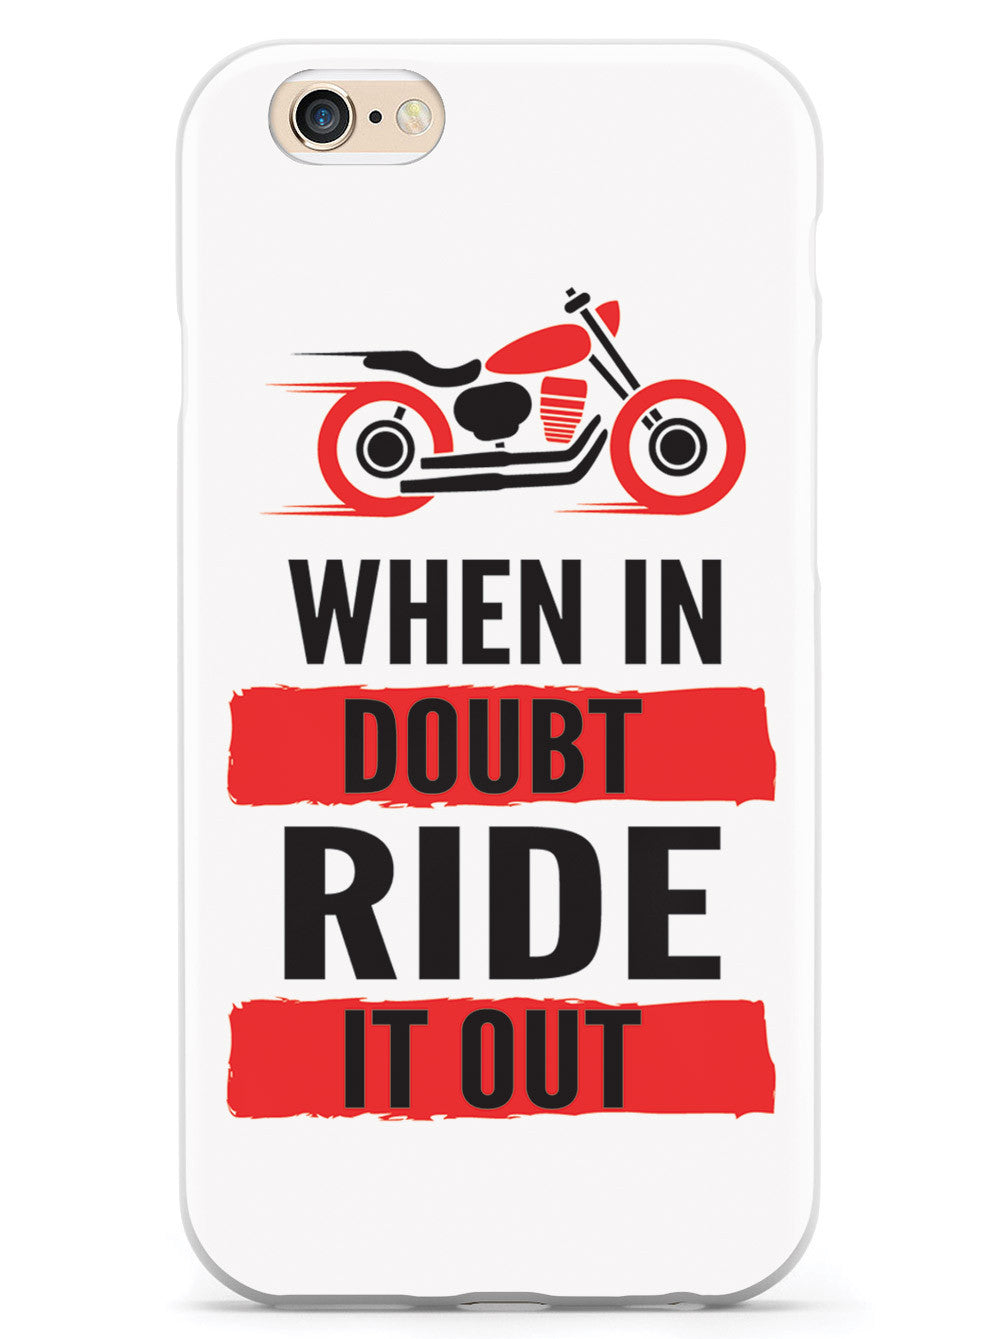 When in Doubt, Ride it Out - White Case